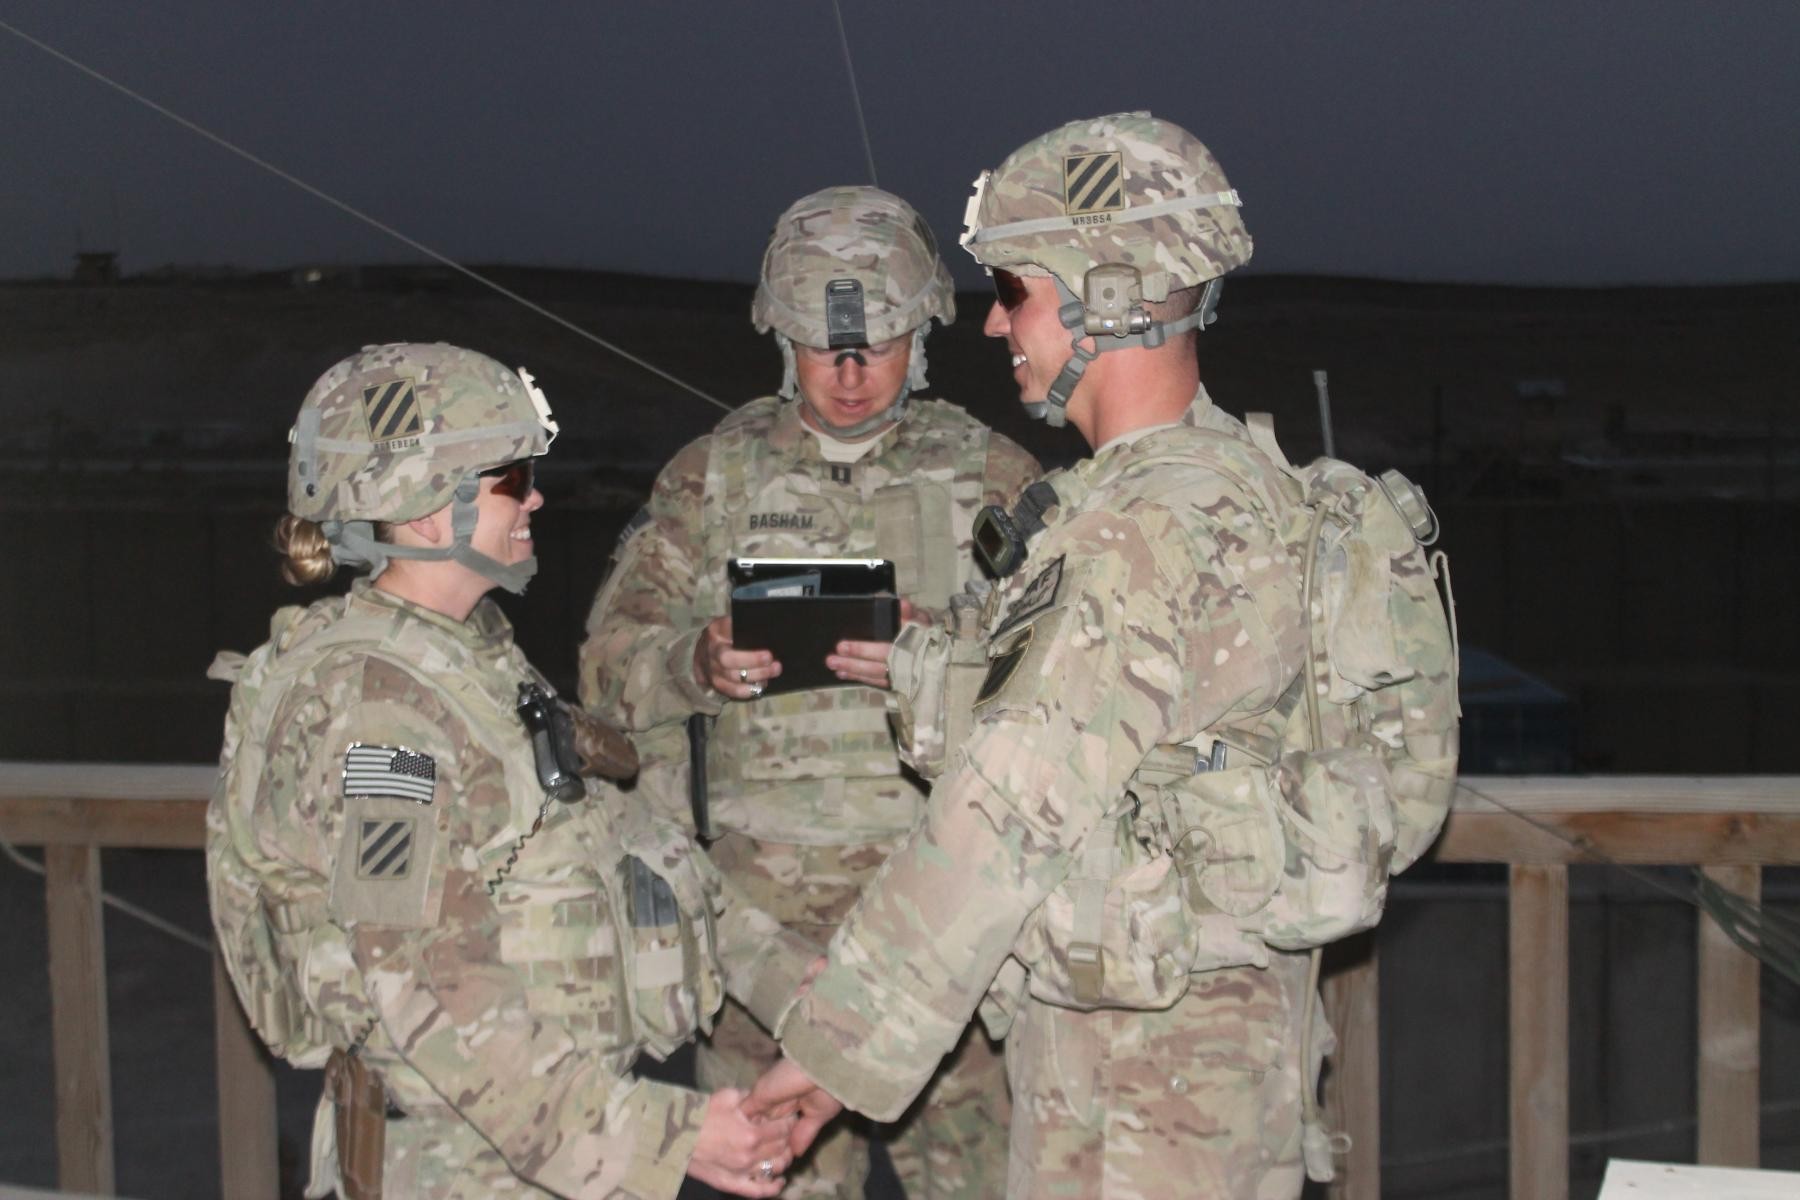 Vanguard couple renew their vows in Afghanistan | Article | The